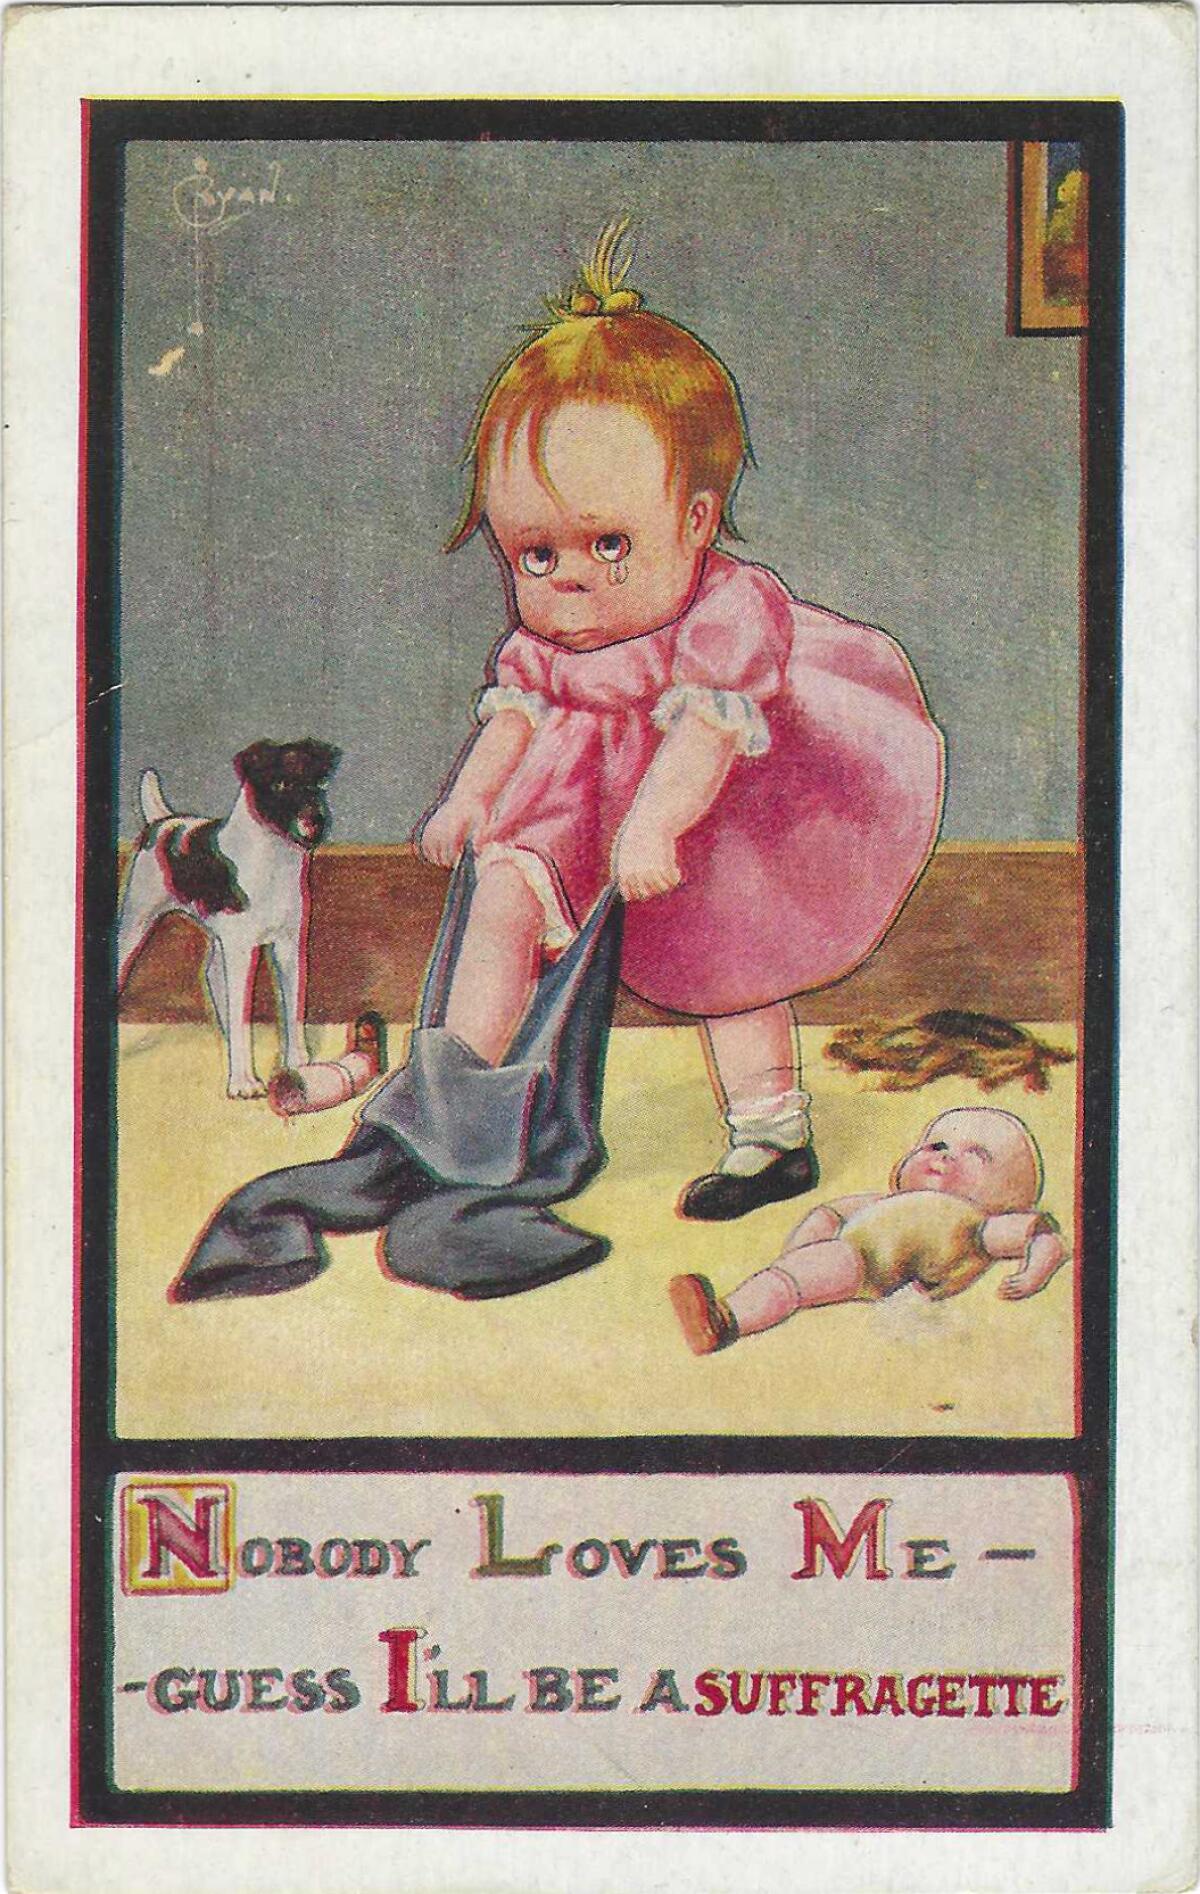 A child in a pink dress pulls on overalls. Text reads: "Nobody loves me -- guess I'll be a suffragette."